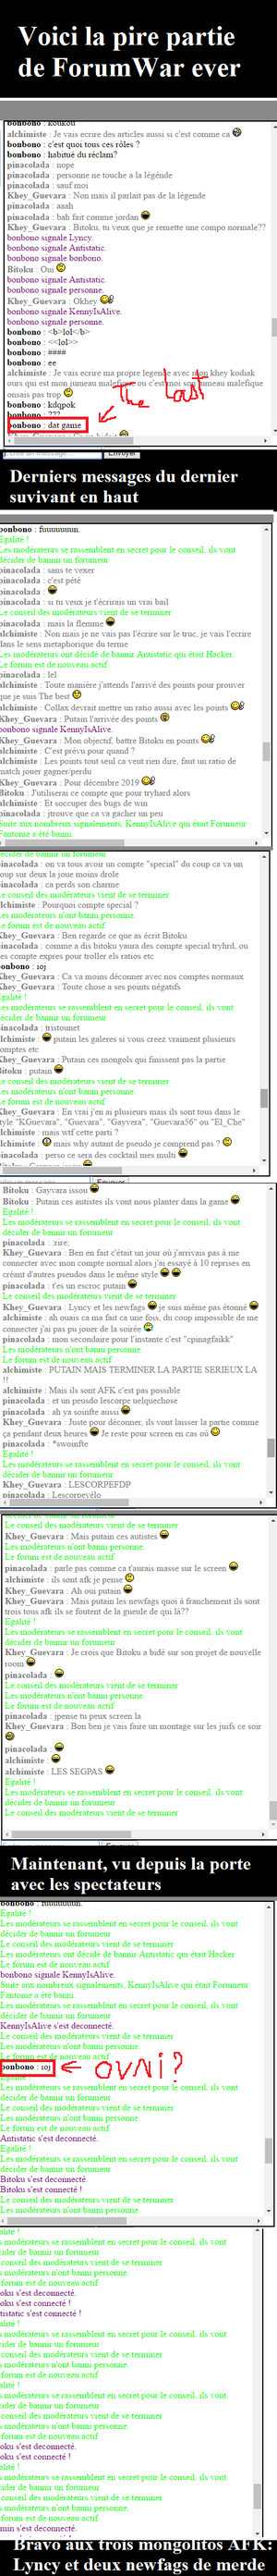 pire ever.png